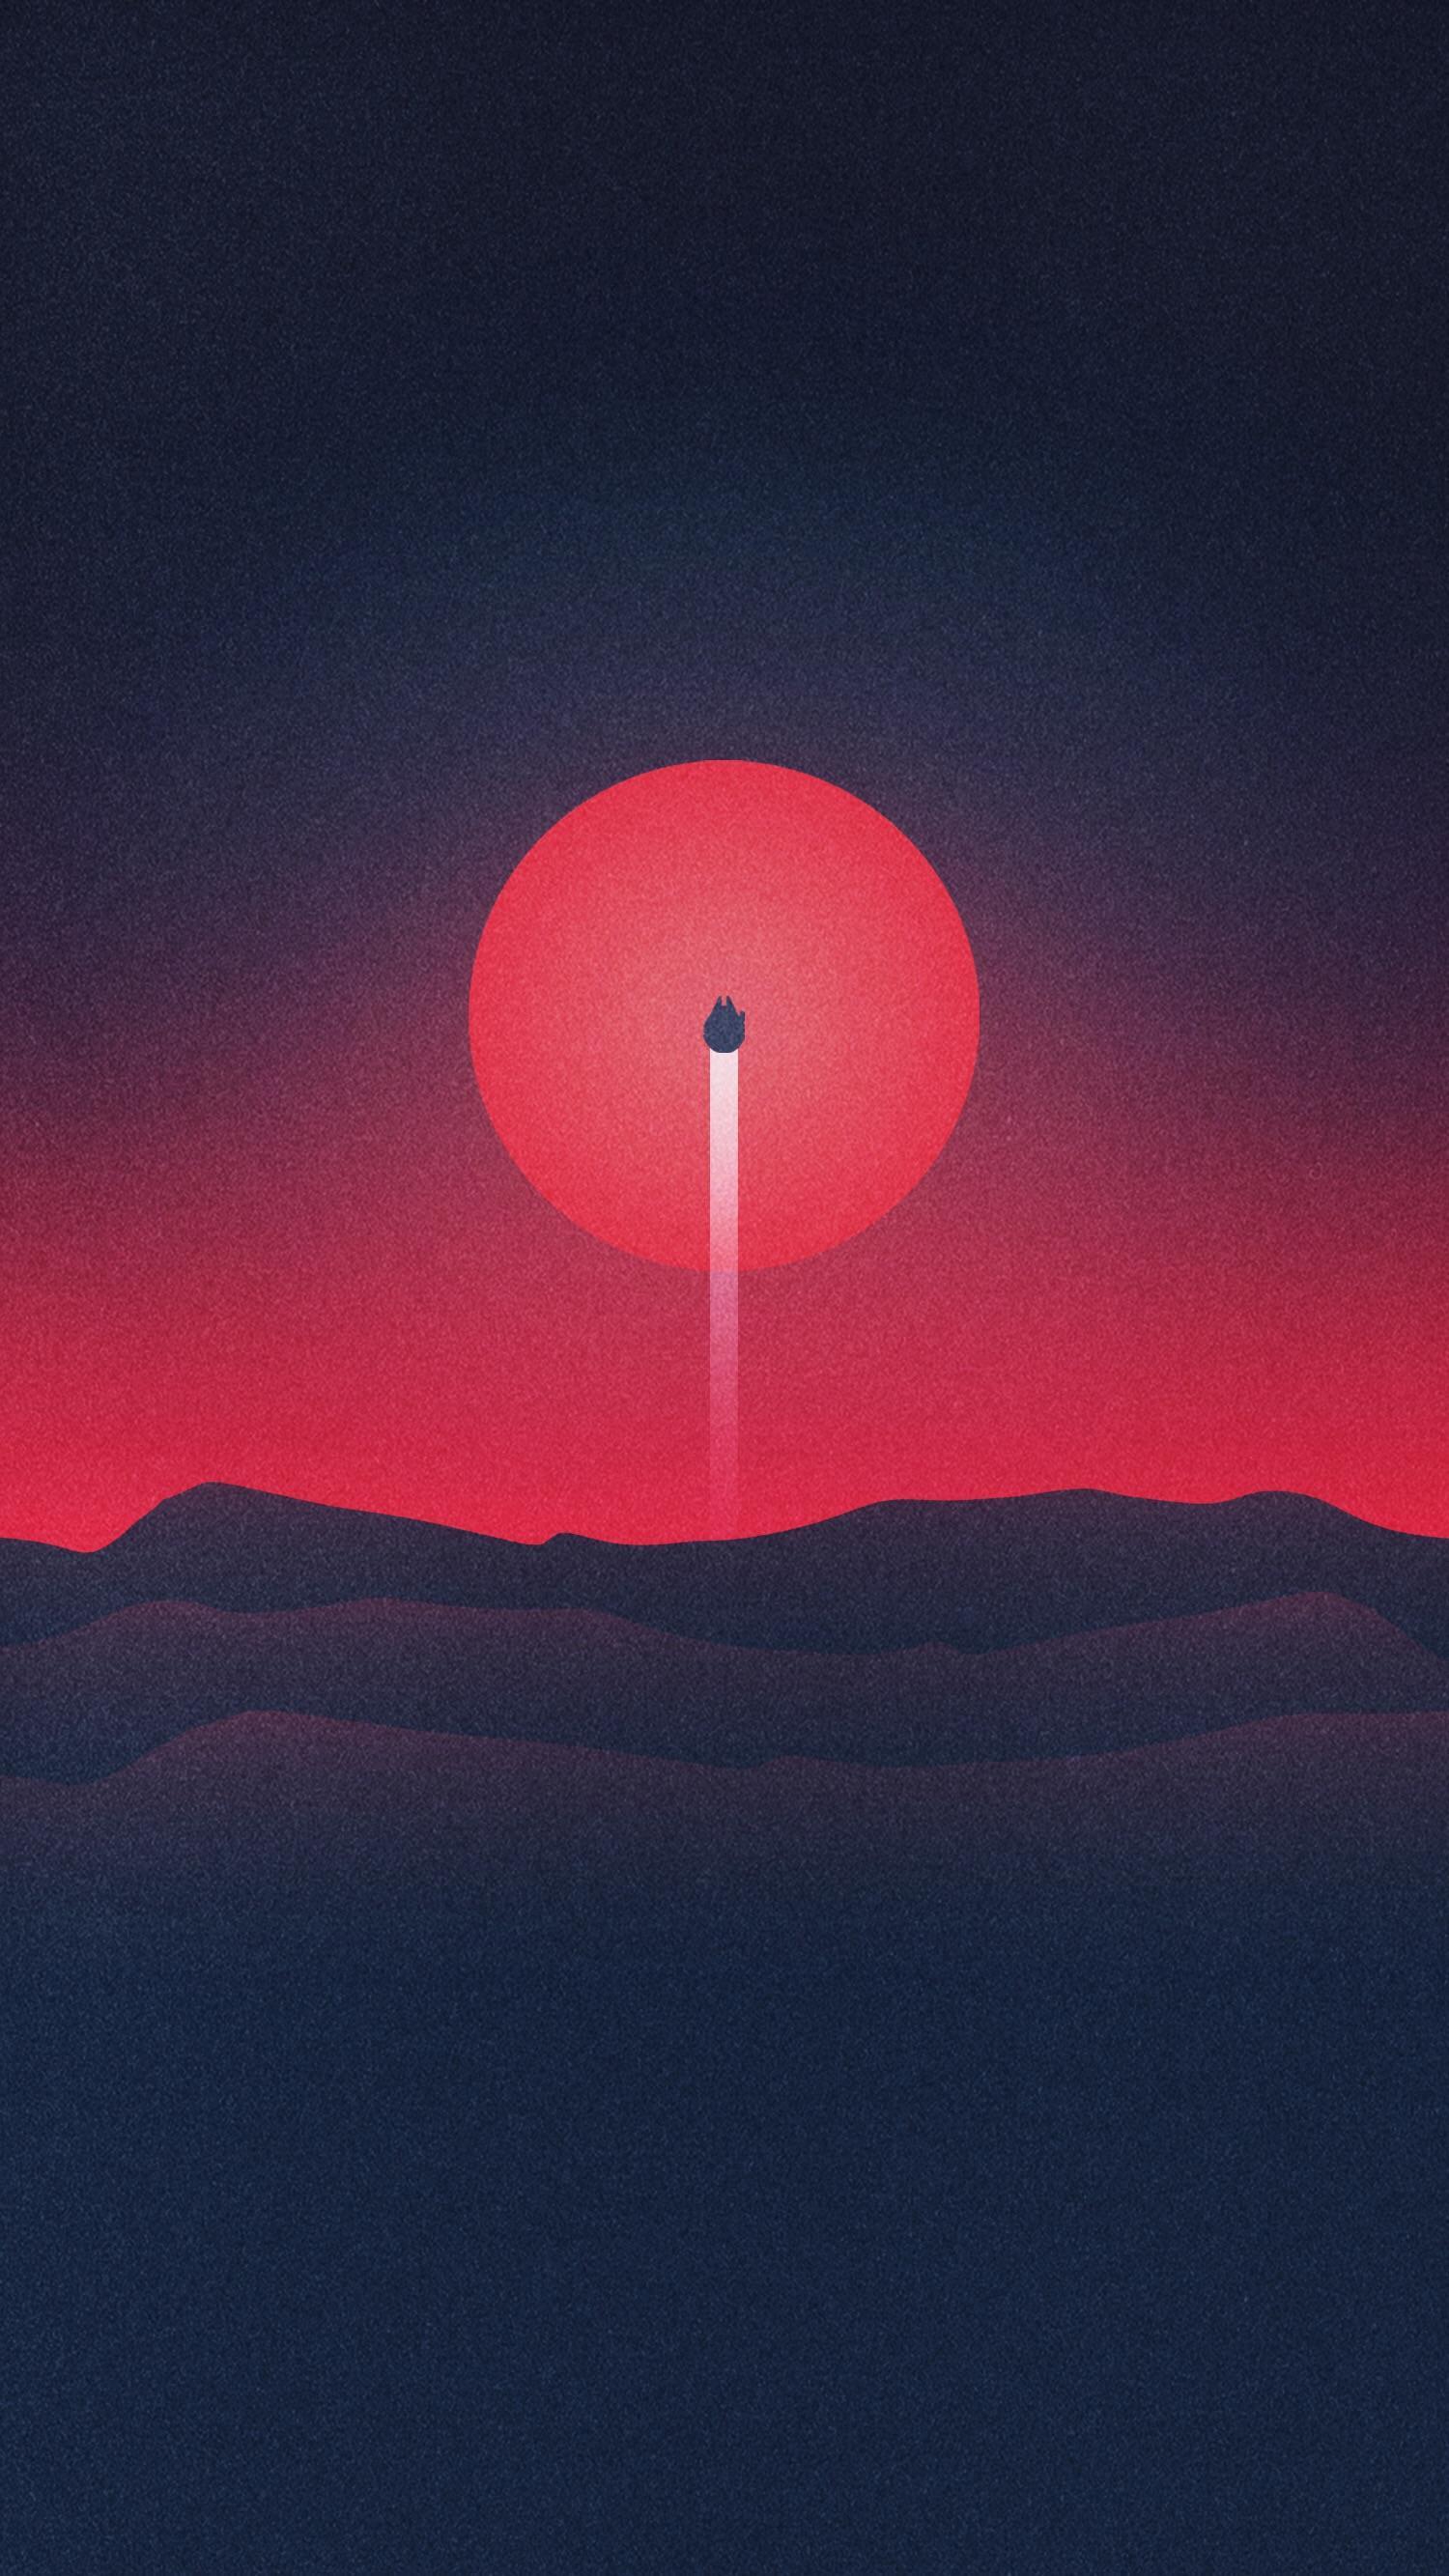 Here's a minimal illustration I did for Star Wars day